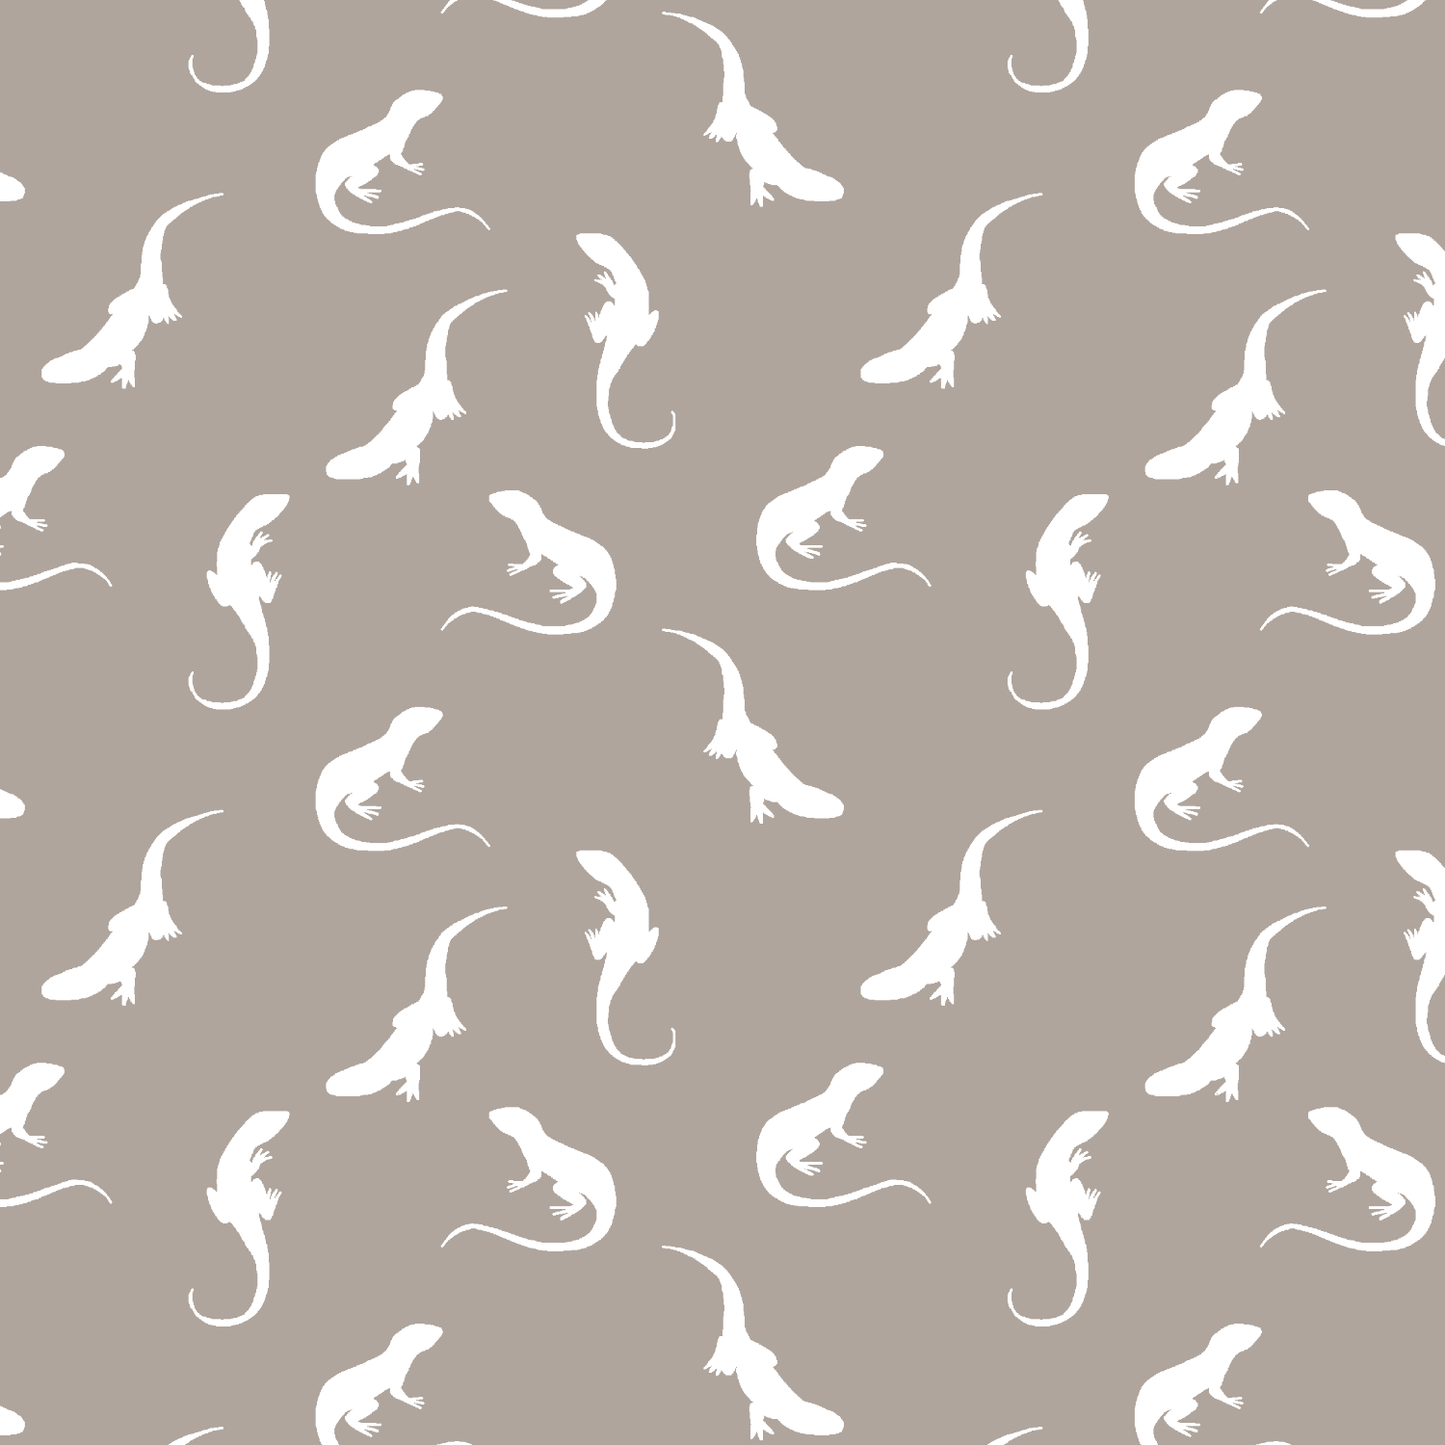 Iguana Silhouette in Taupe